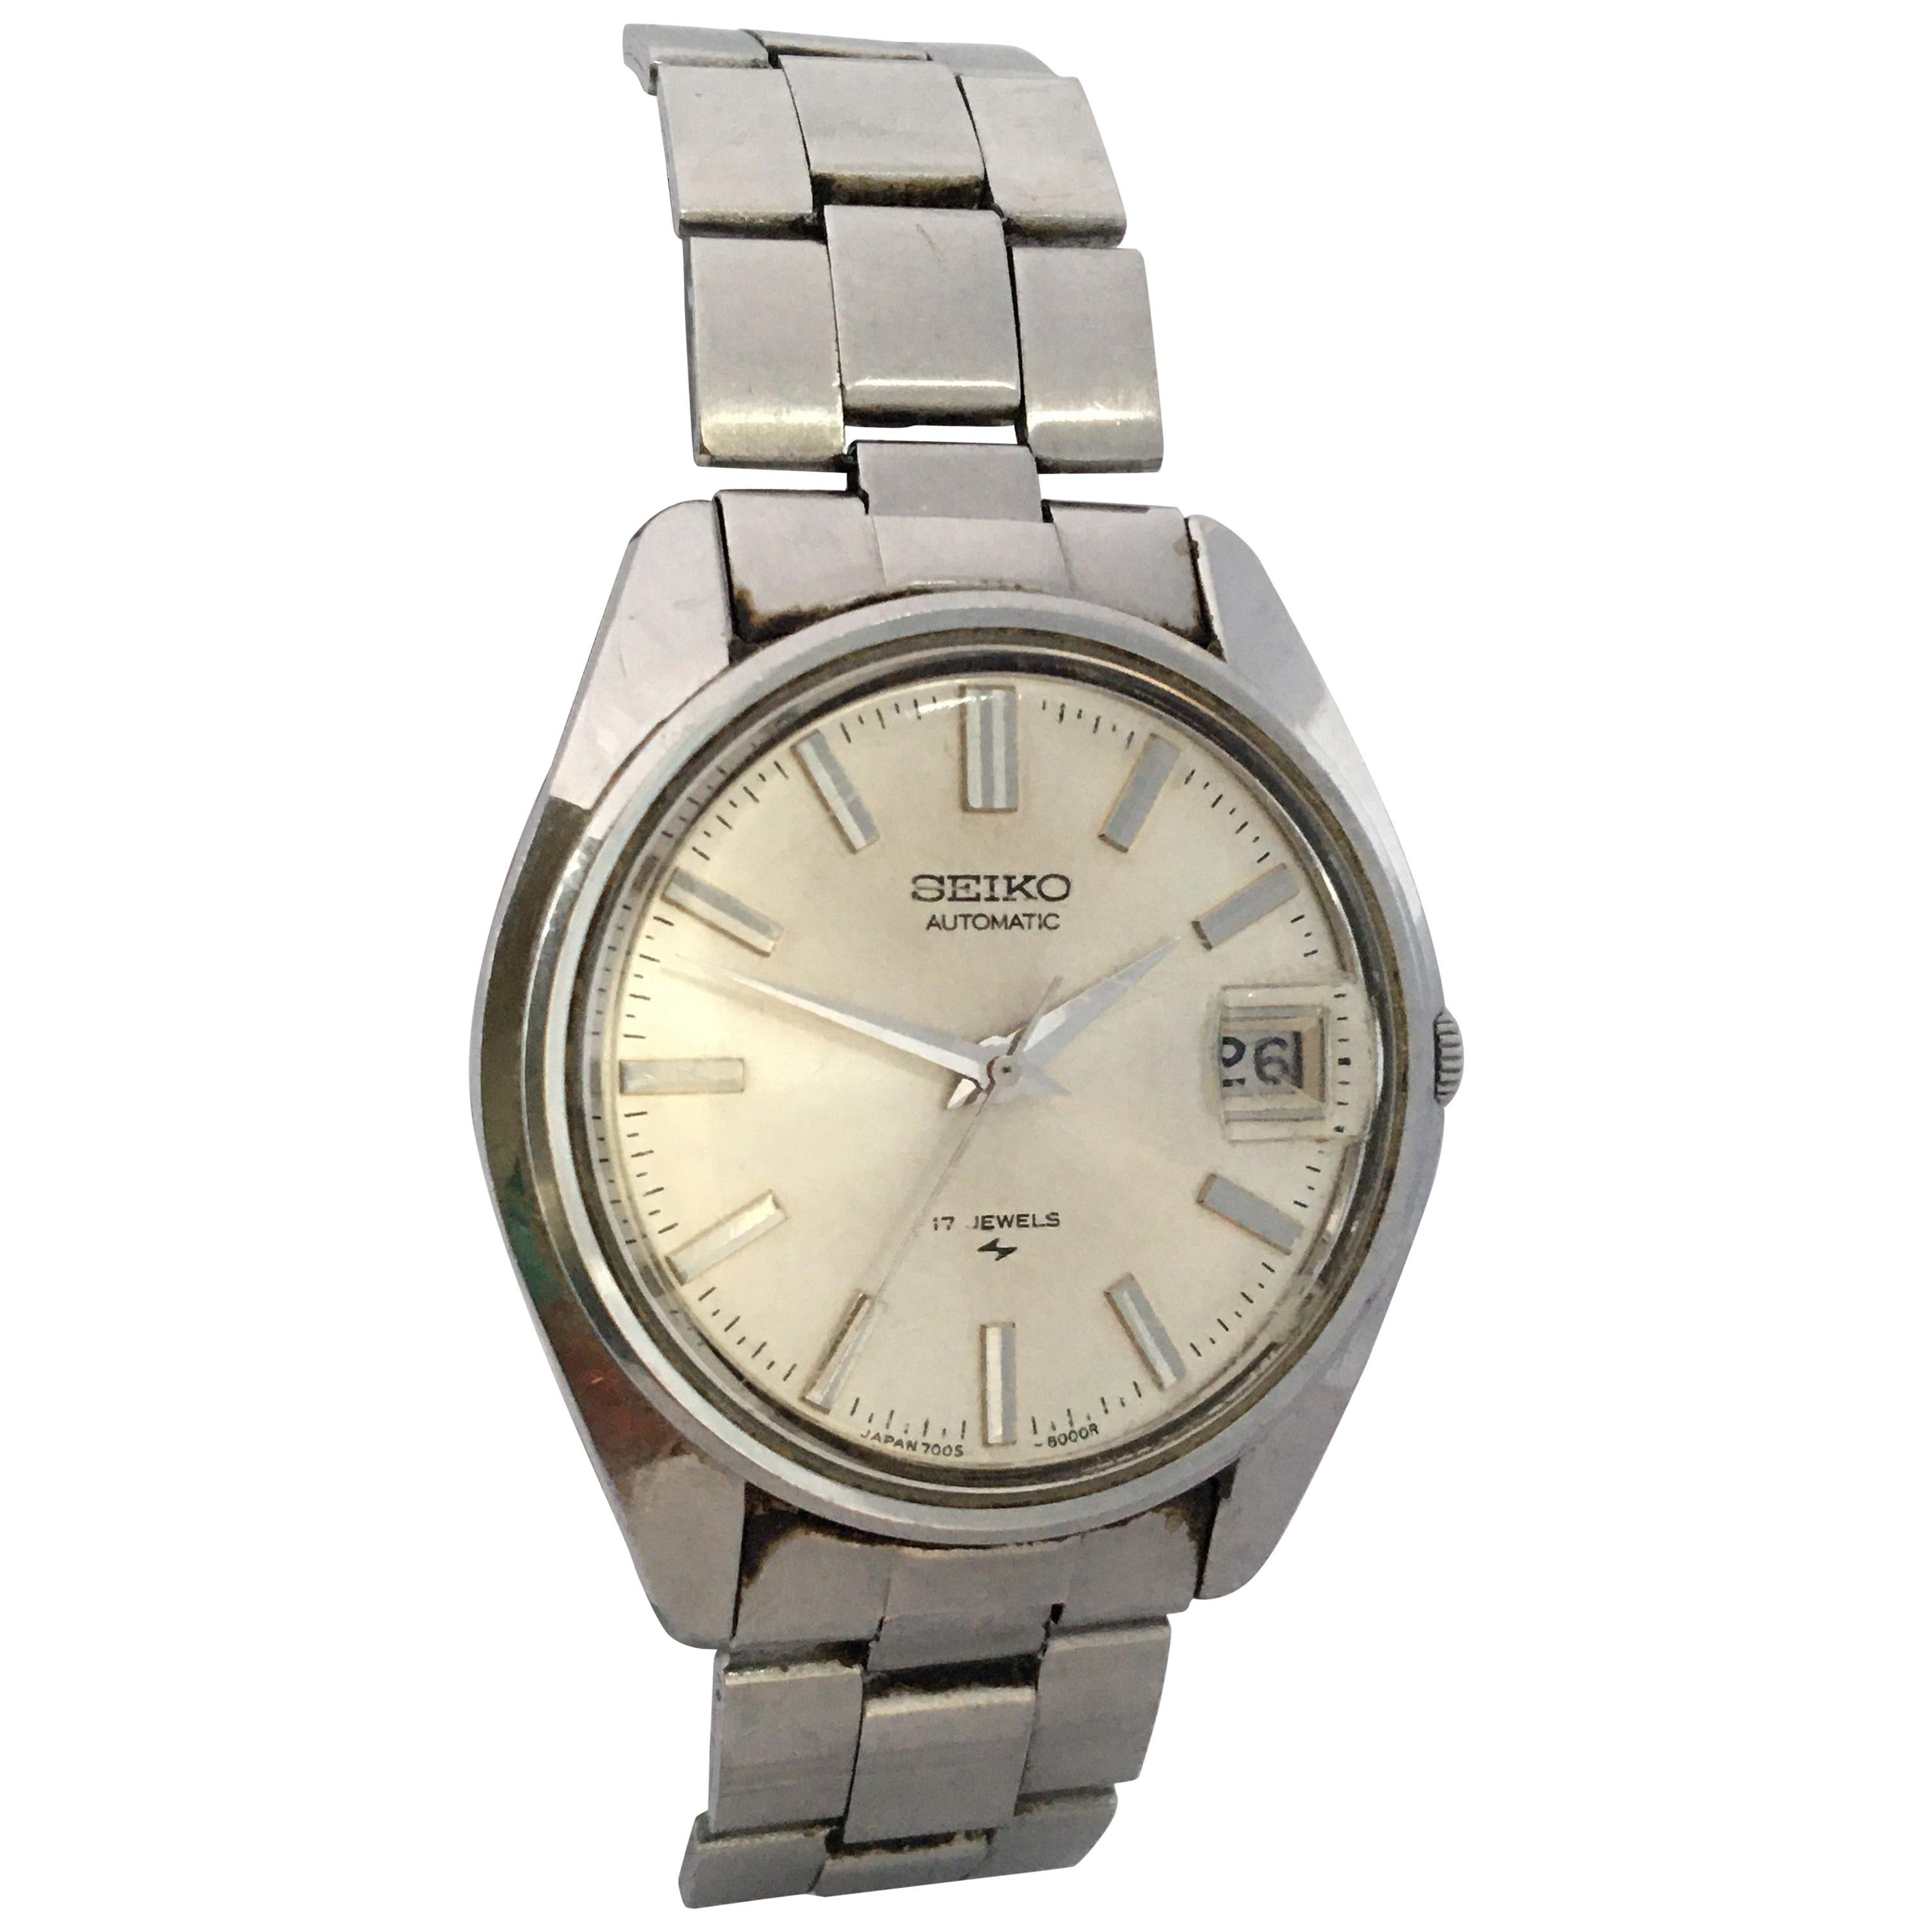 Vintage 1970s Stainless Steel Seiko Automatic Wristwatch